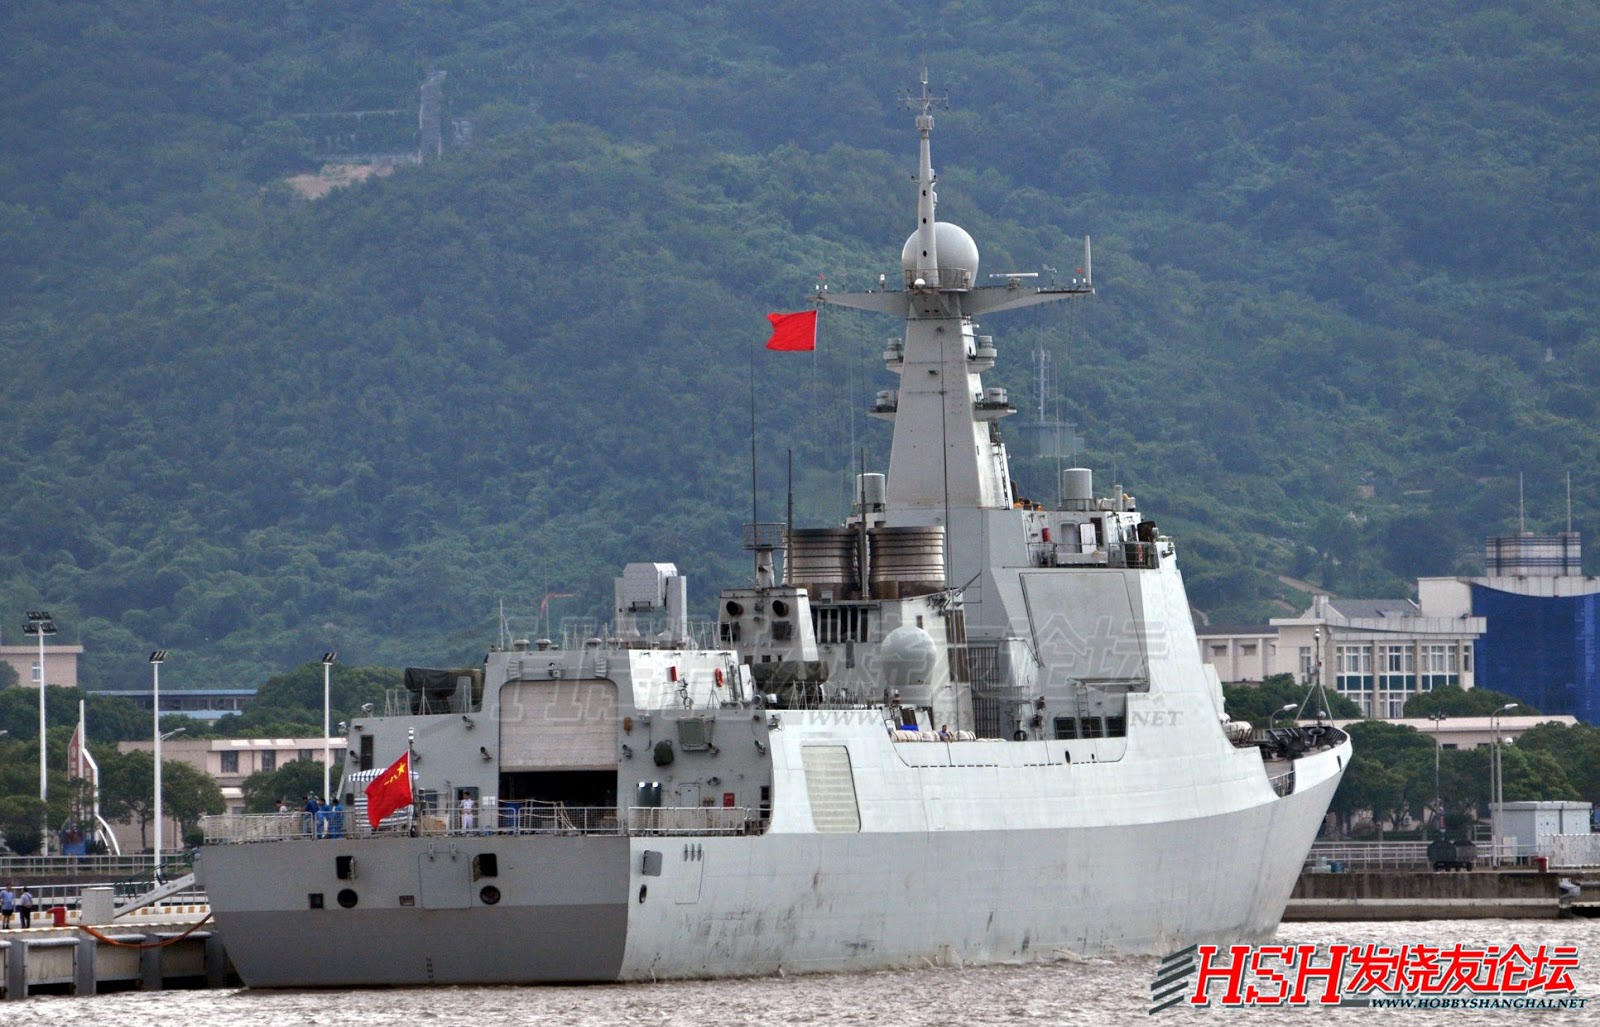 Type+052D+Guided+Missile+Destroyer,+Type+052C+,+Peoples+Liberation+Army+Navy,+China,+Zhoushan+naval+base+5+Type+052C+Type+052D+destroyers+built+055+056+naval+missile+antiship+aesa+radar+hhq-9+hhq-16+%285%29.jpg